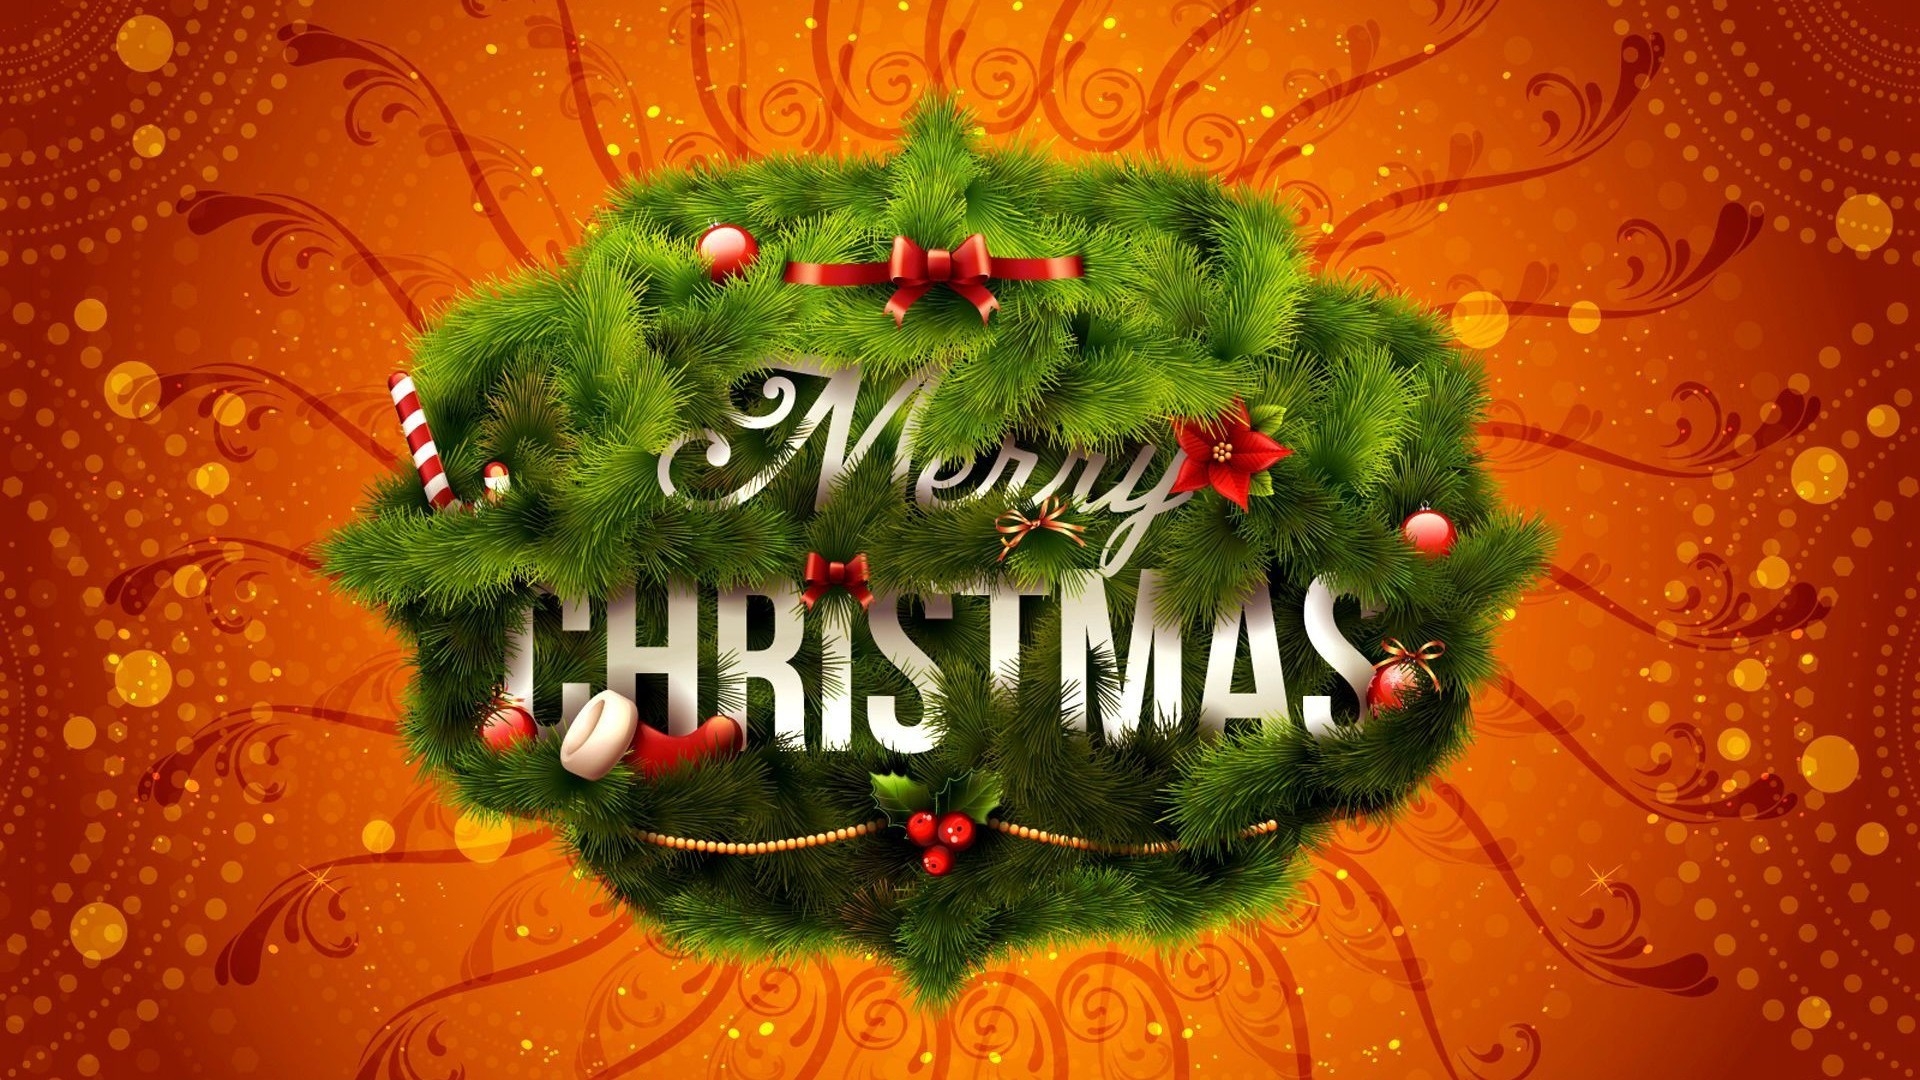 Merry Christmas Wreath for 1920 x 1080 HDTV 1080p resolution